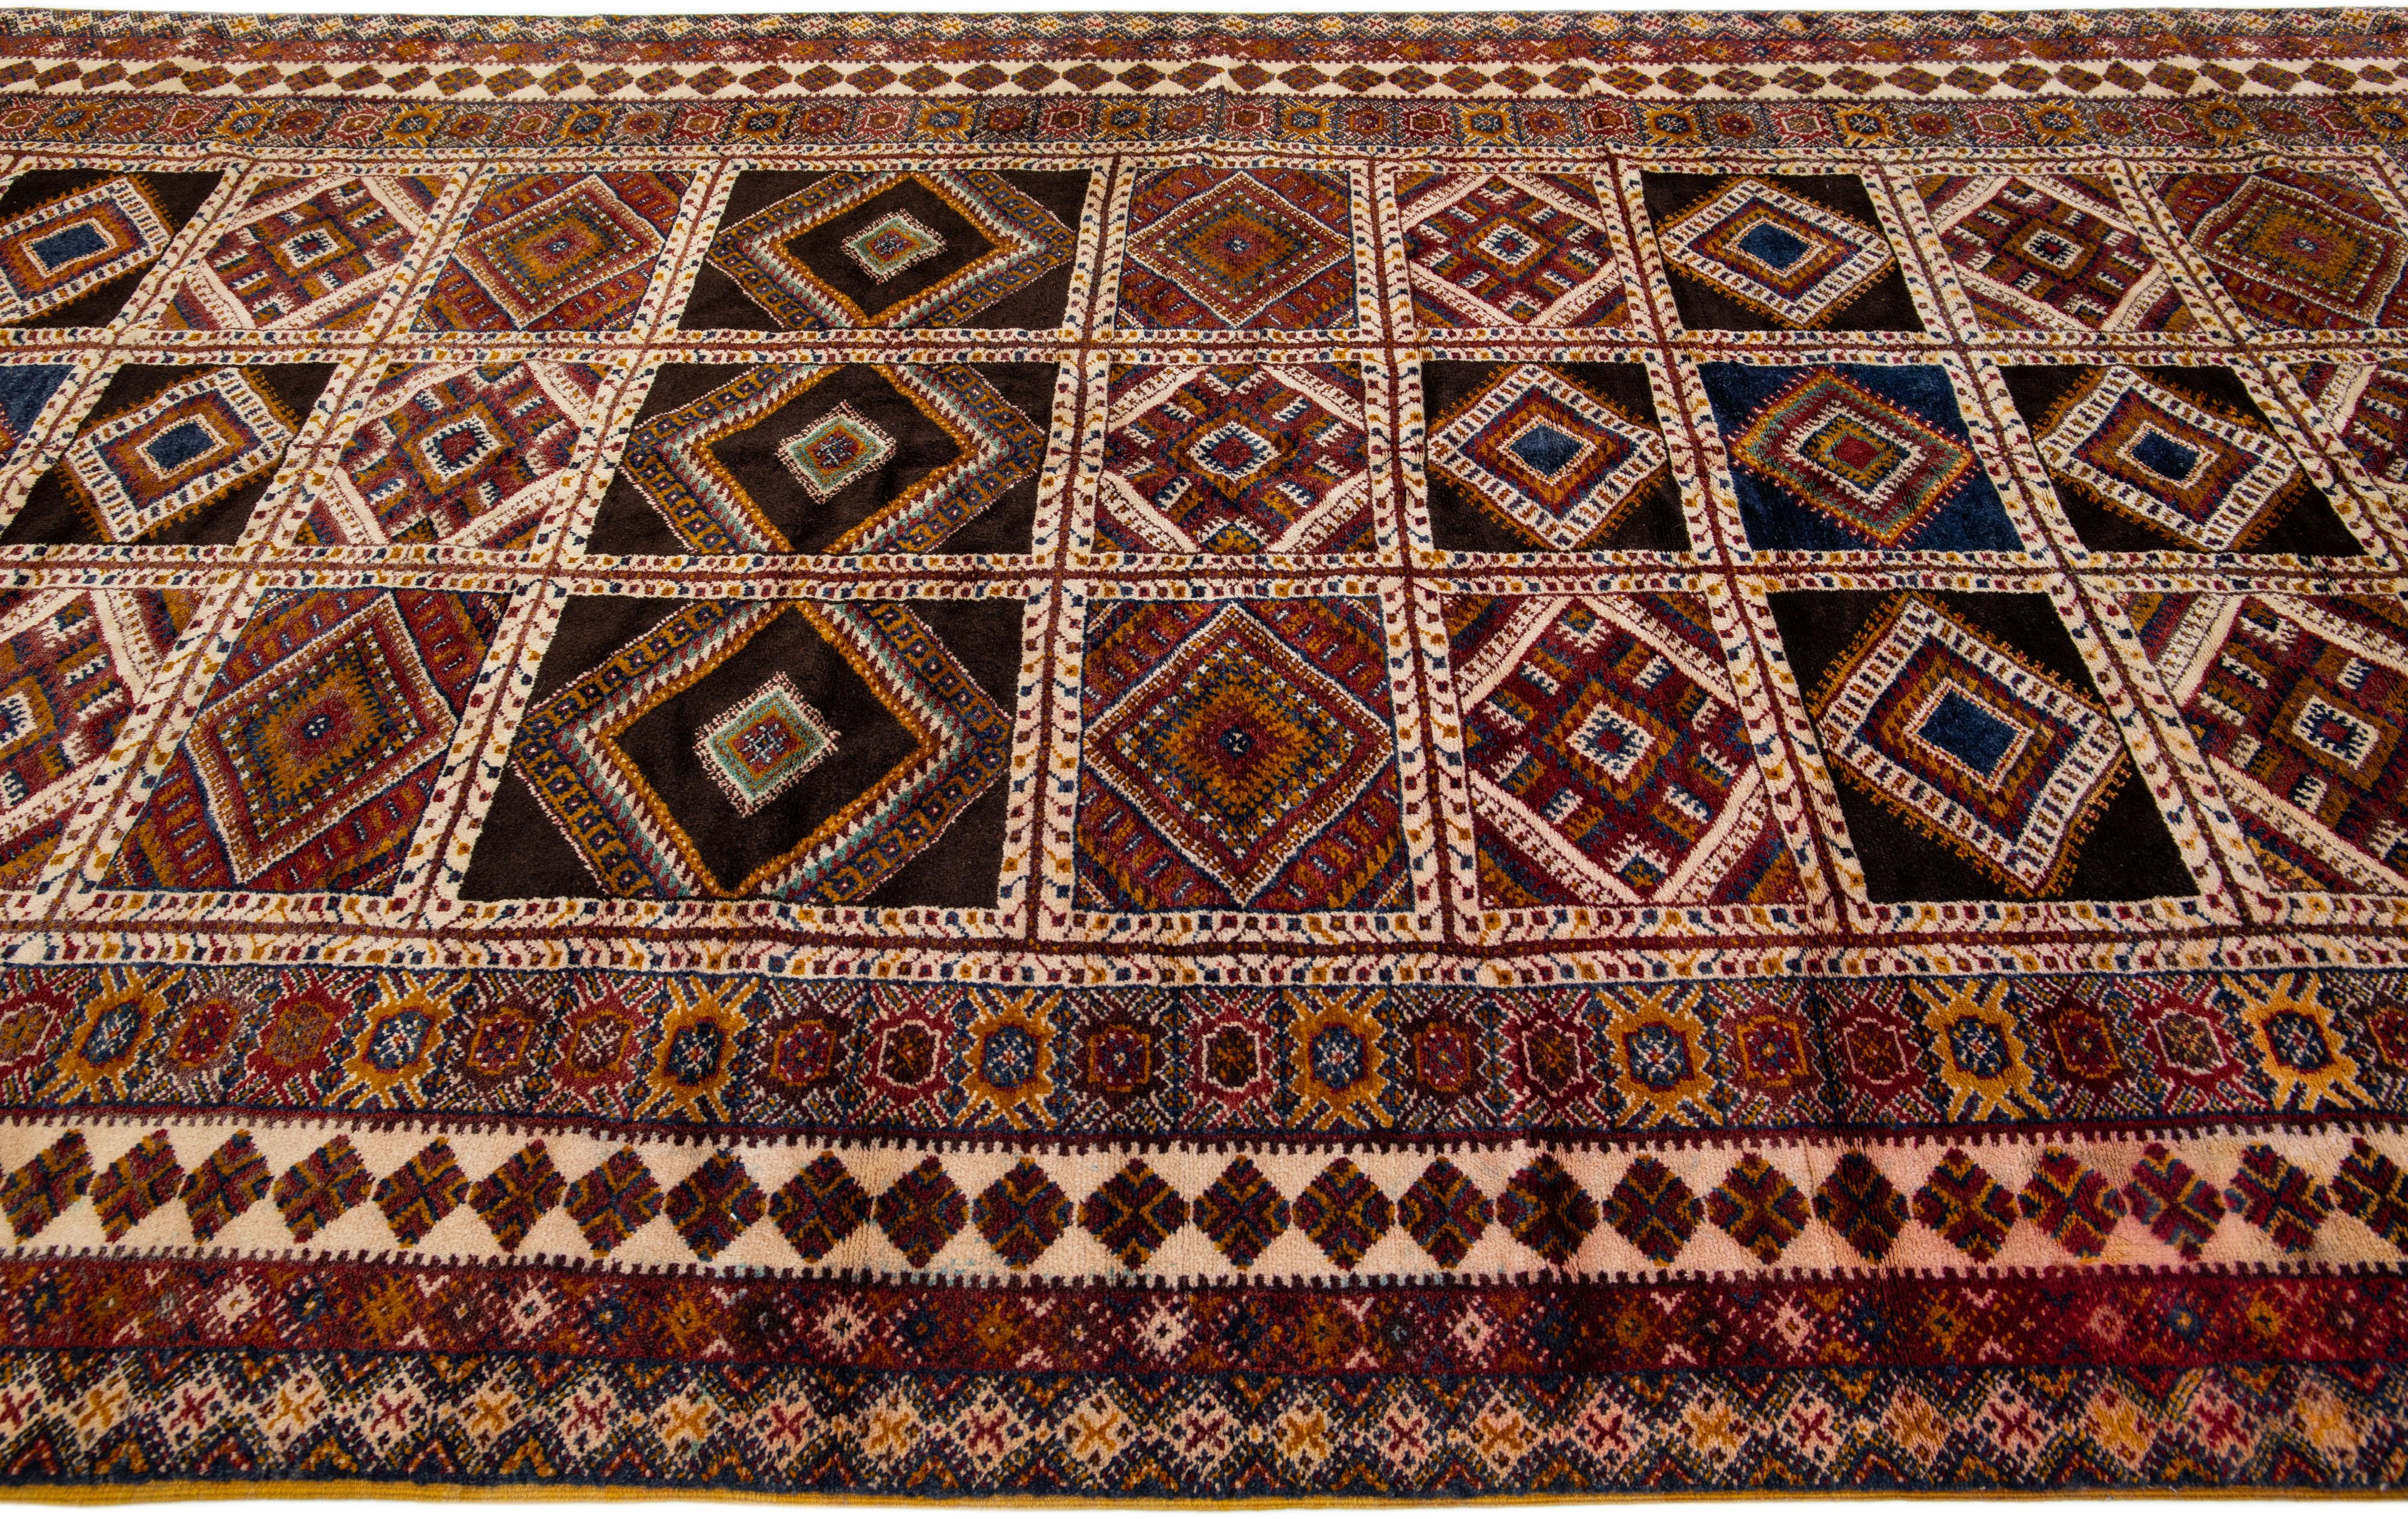 Allover Tribal Handmade Vintage Moroccan Wool Rug With Earthy Tones In Excellent Condition For Sale In Norwalk, CT